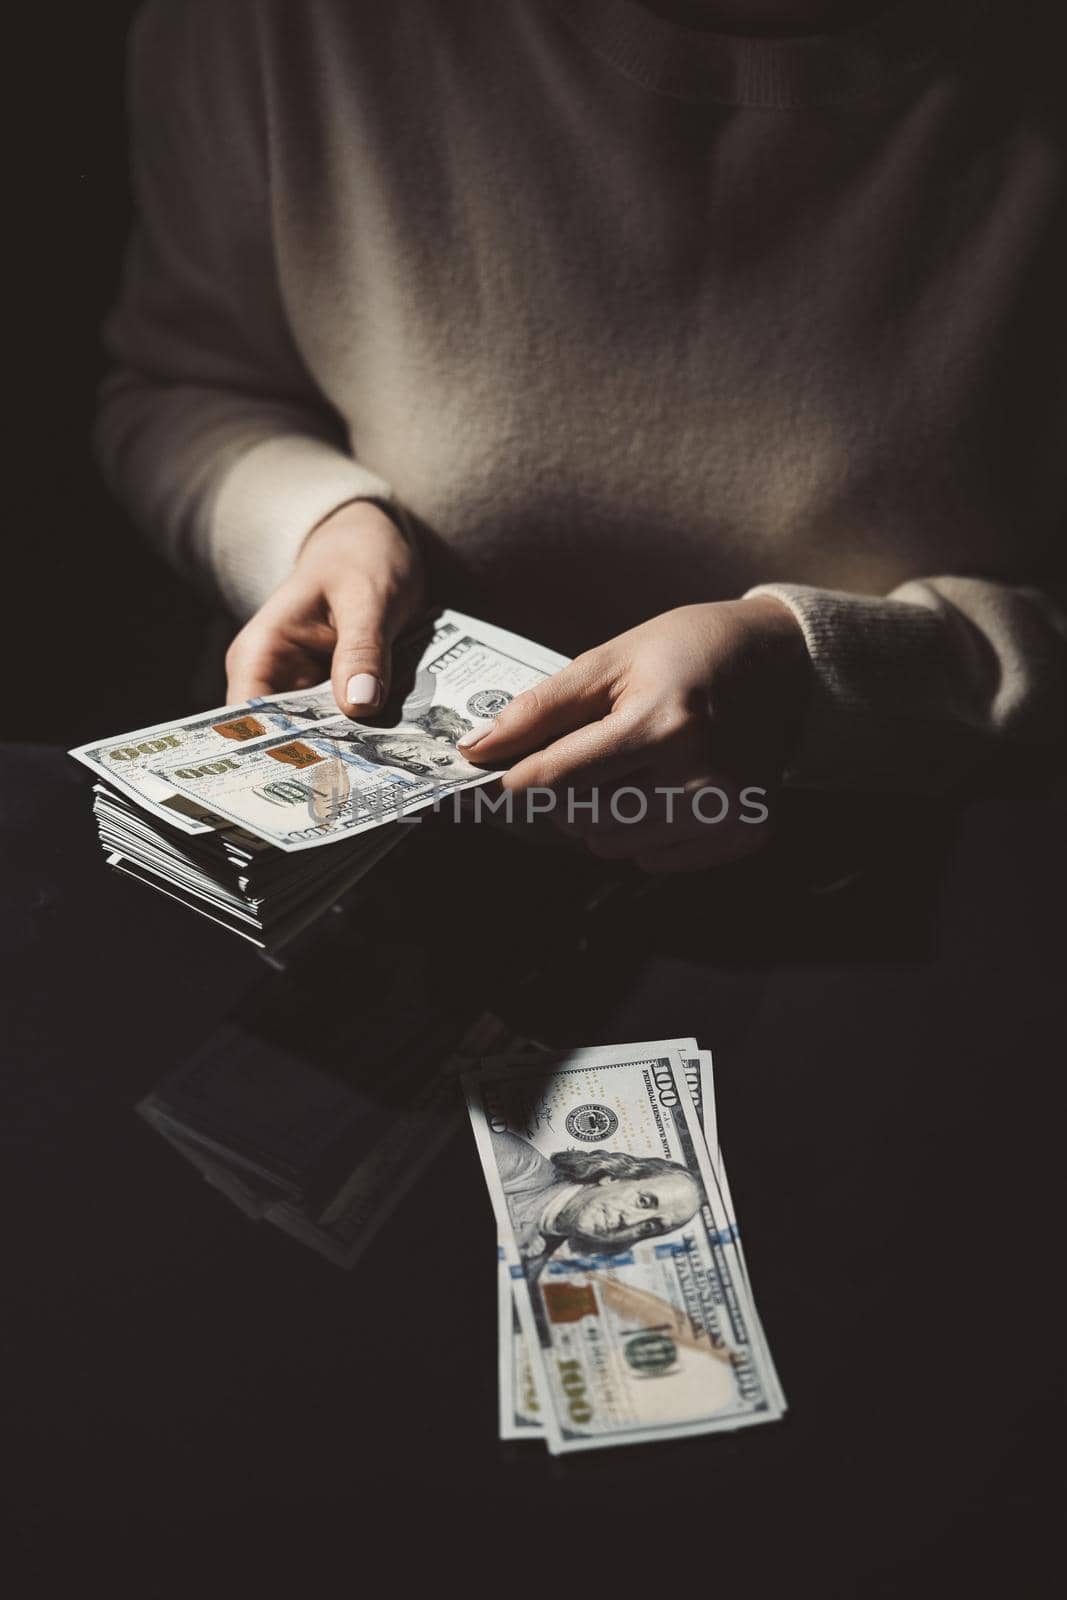 Woman is counting cash money - salary or other income. Close-up of hands with banknotes.